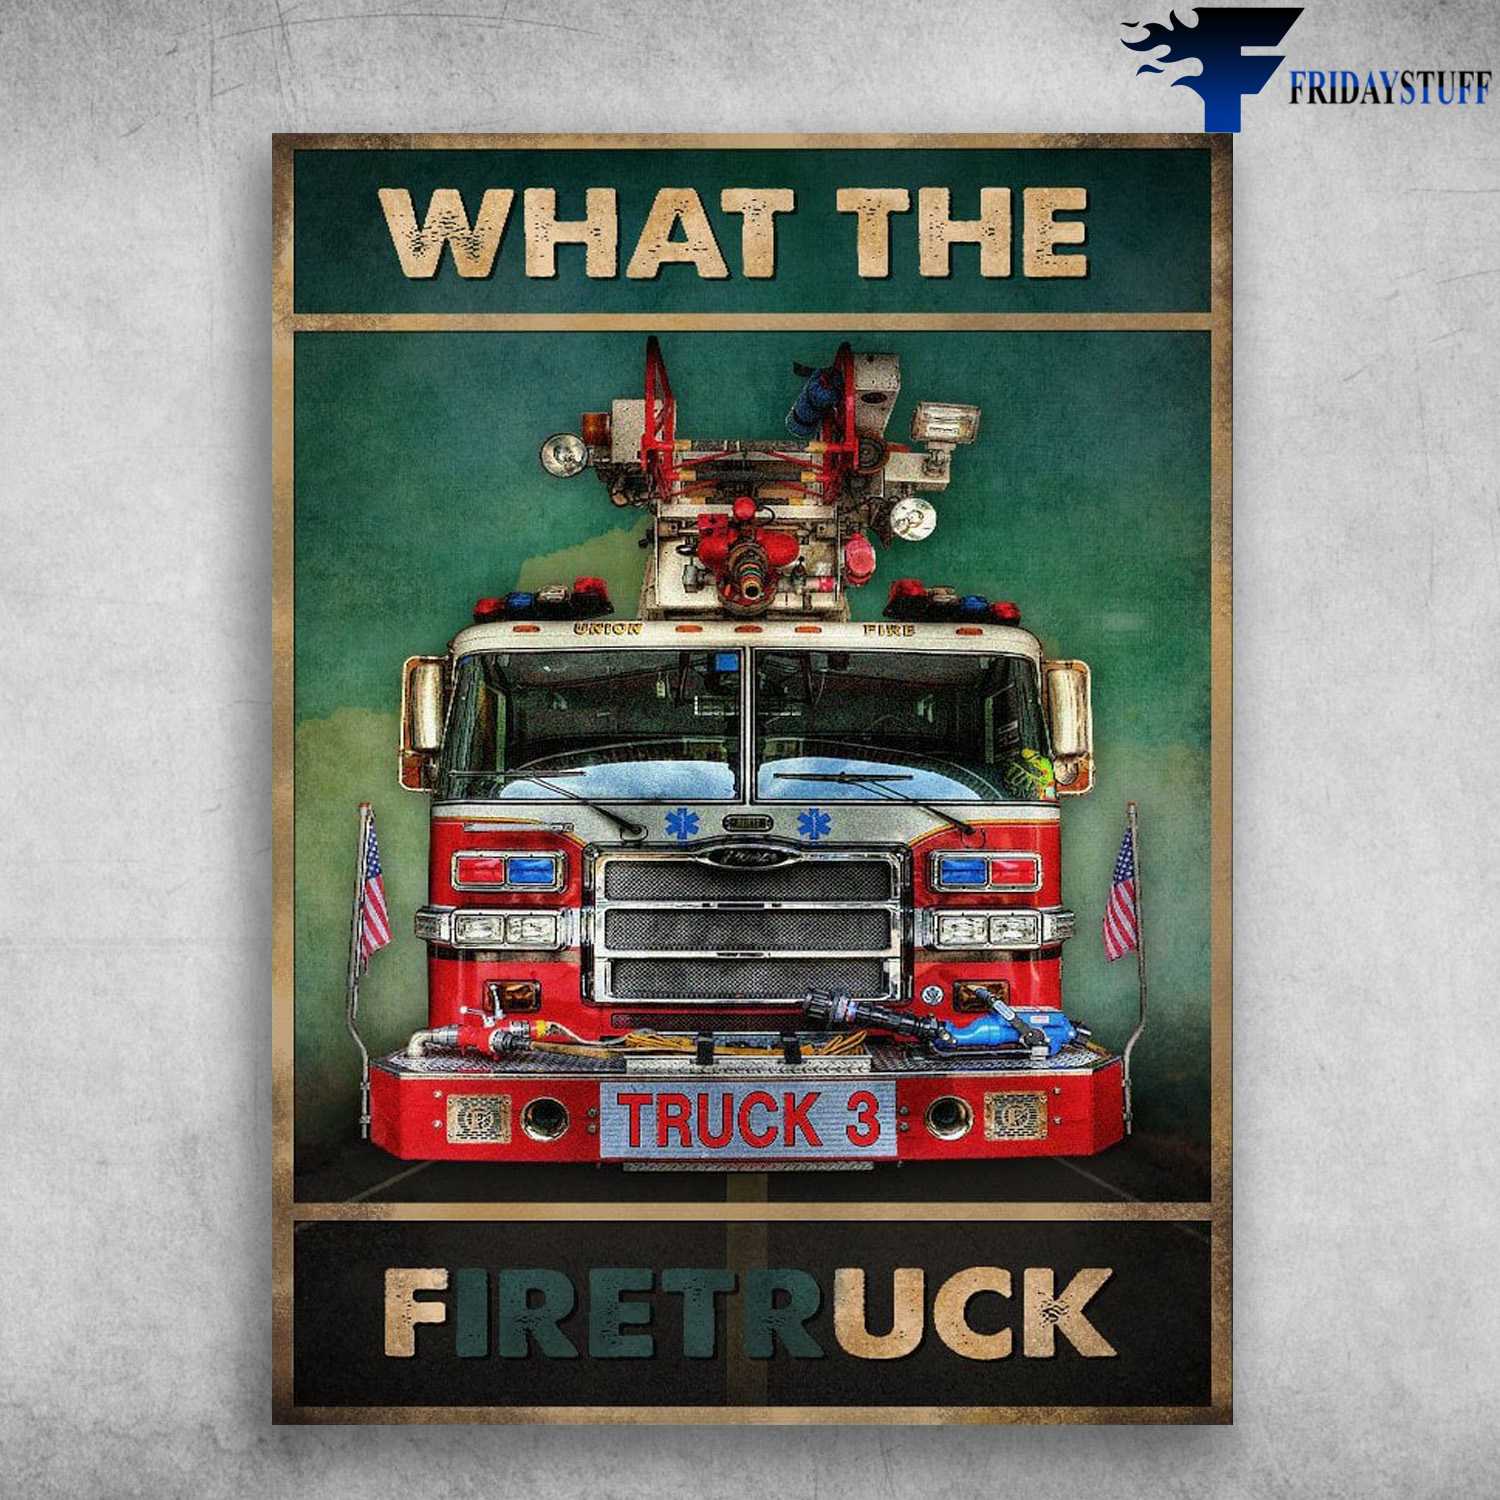 American Fire Truck, Fire Fighter Poster - What The Firetruck